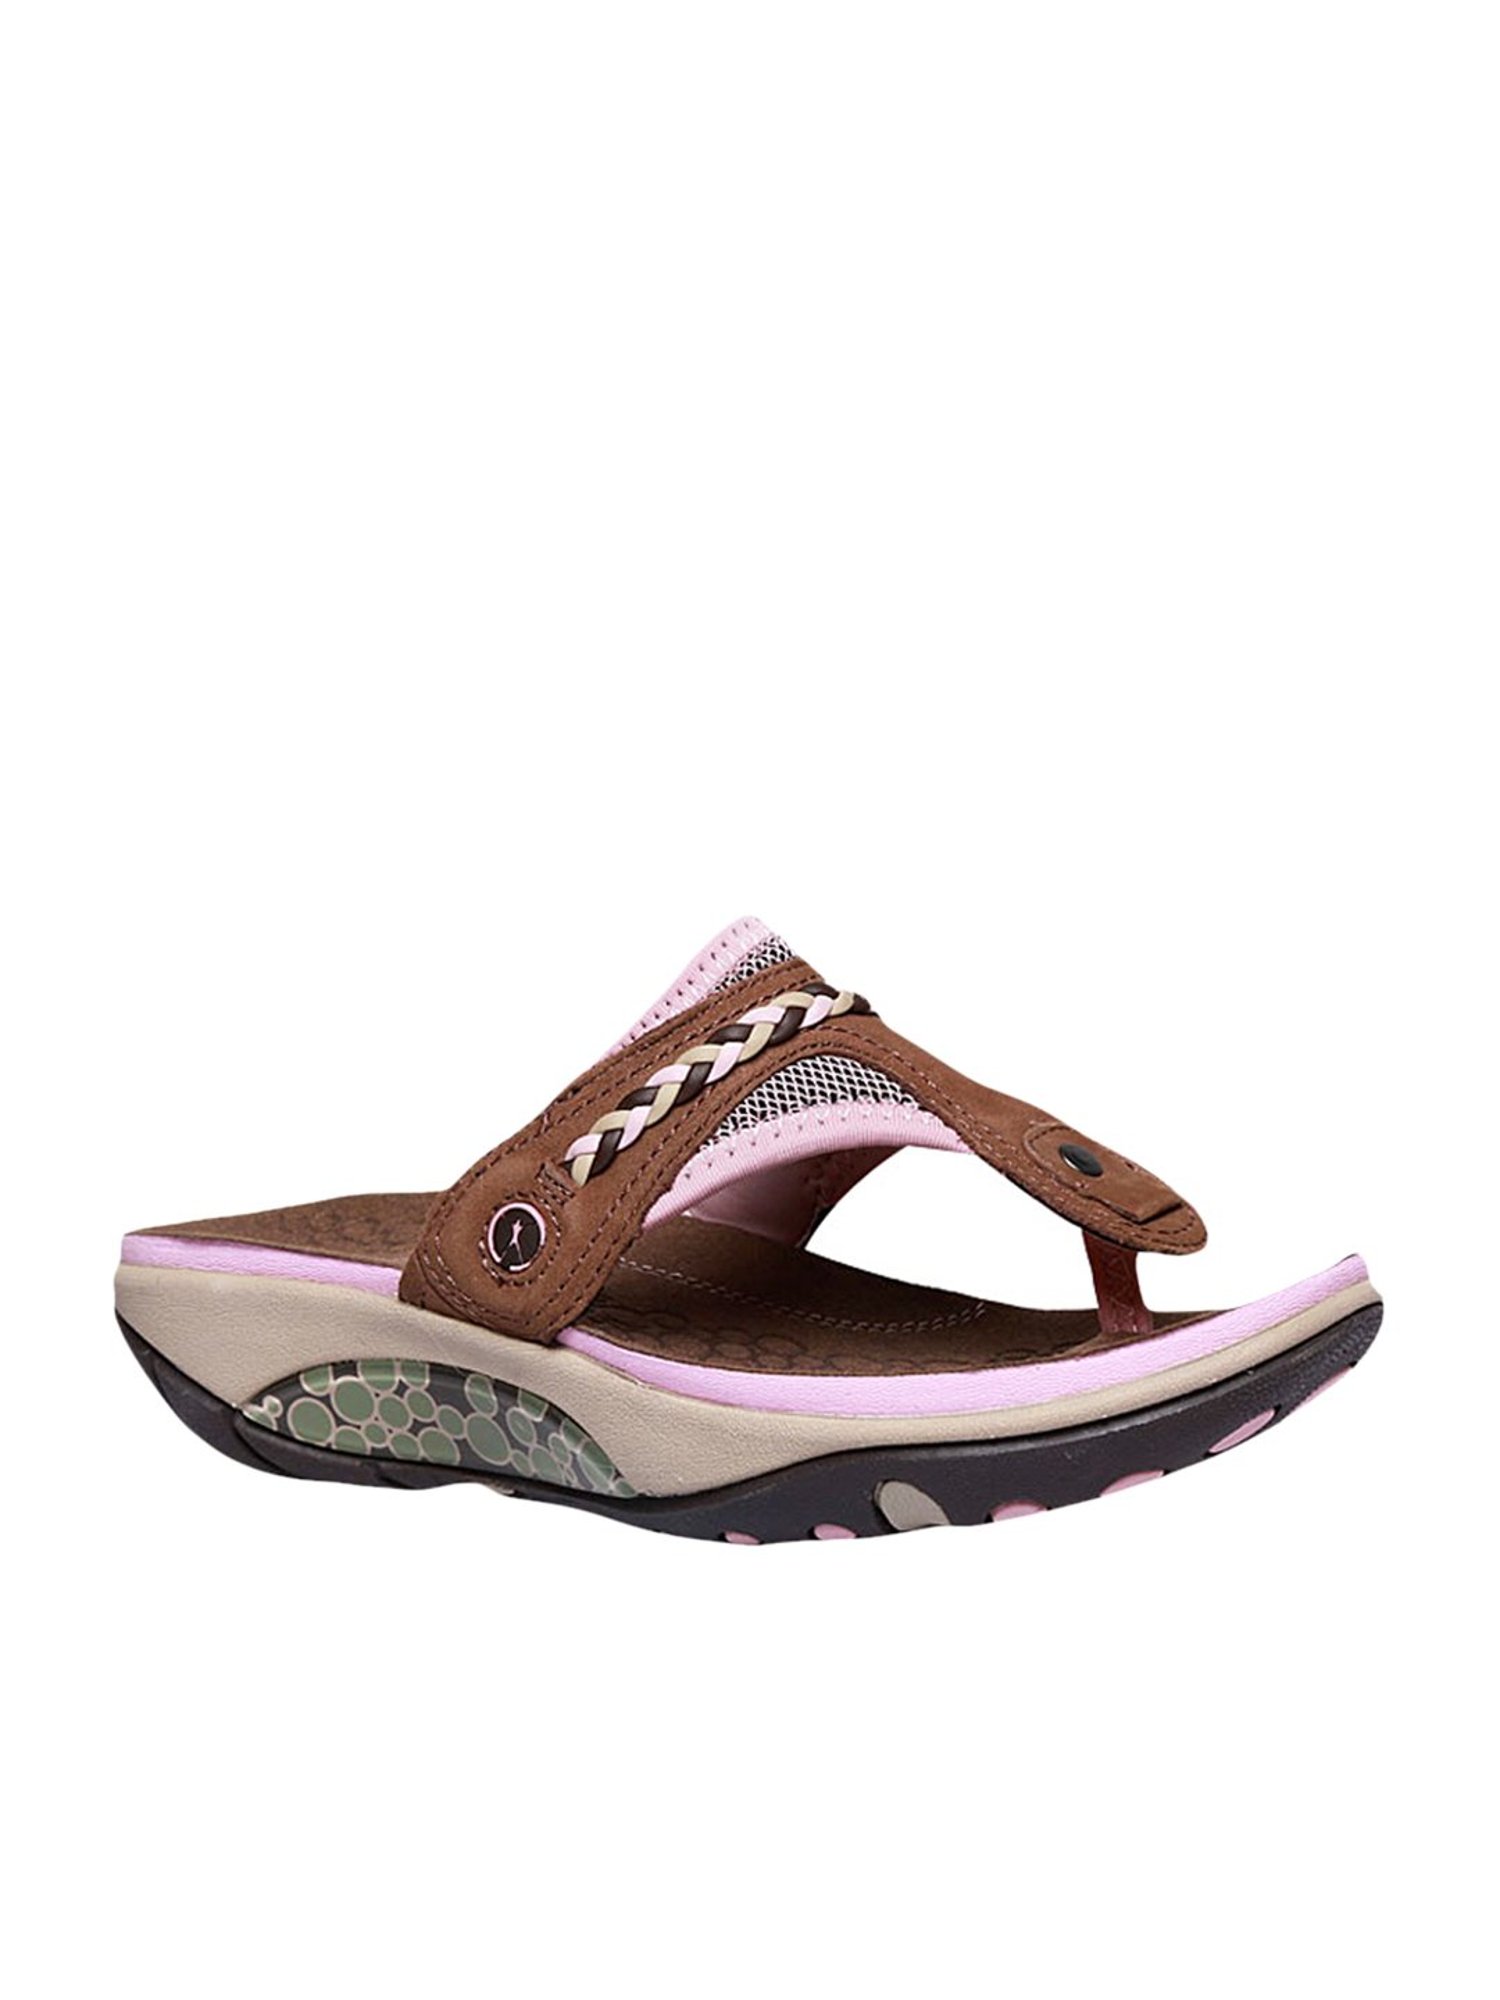 Buy Hush Puppies by Bata Move Brown Pink Thong Sandals for Men at Best Price @ Tata CLiQ